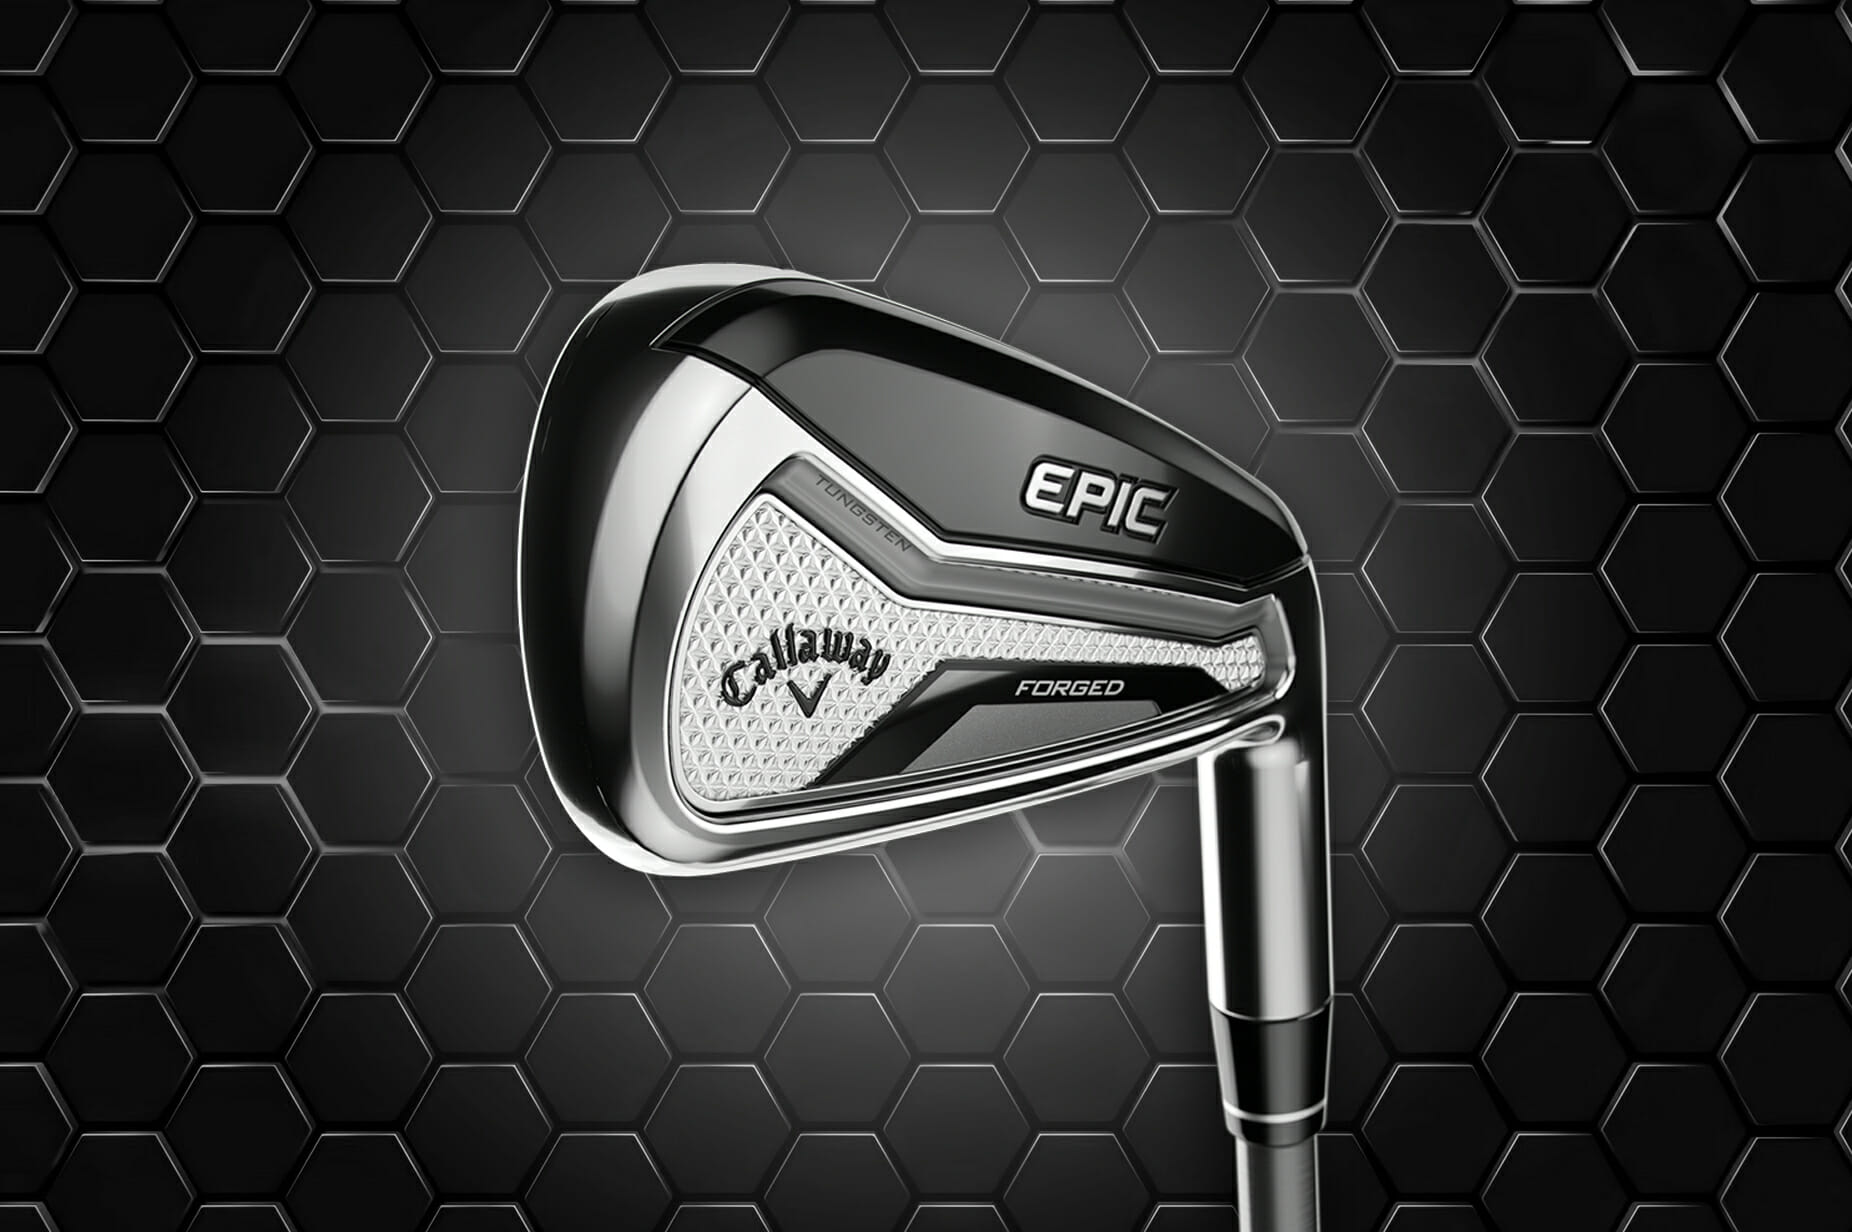 Callaway unveil Epic Forged Irons – It’s a beauty and a beast